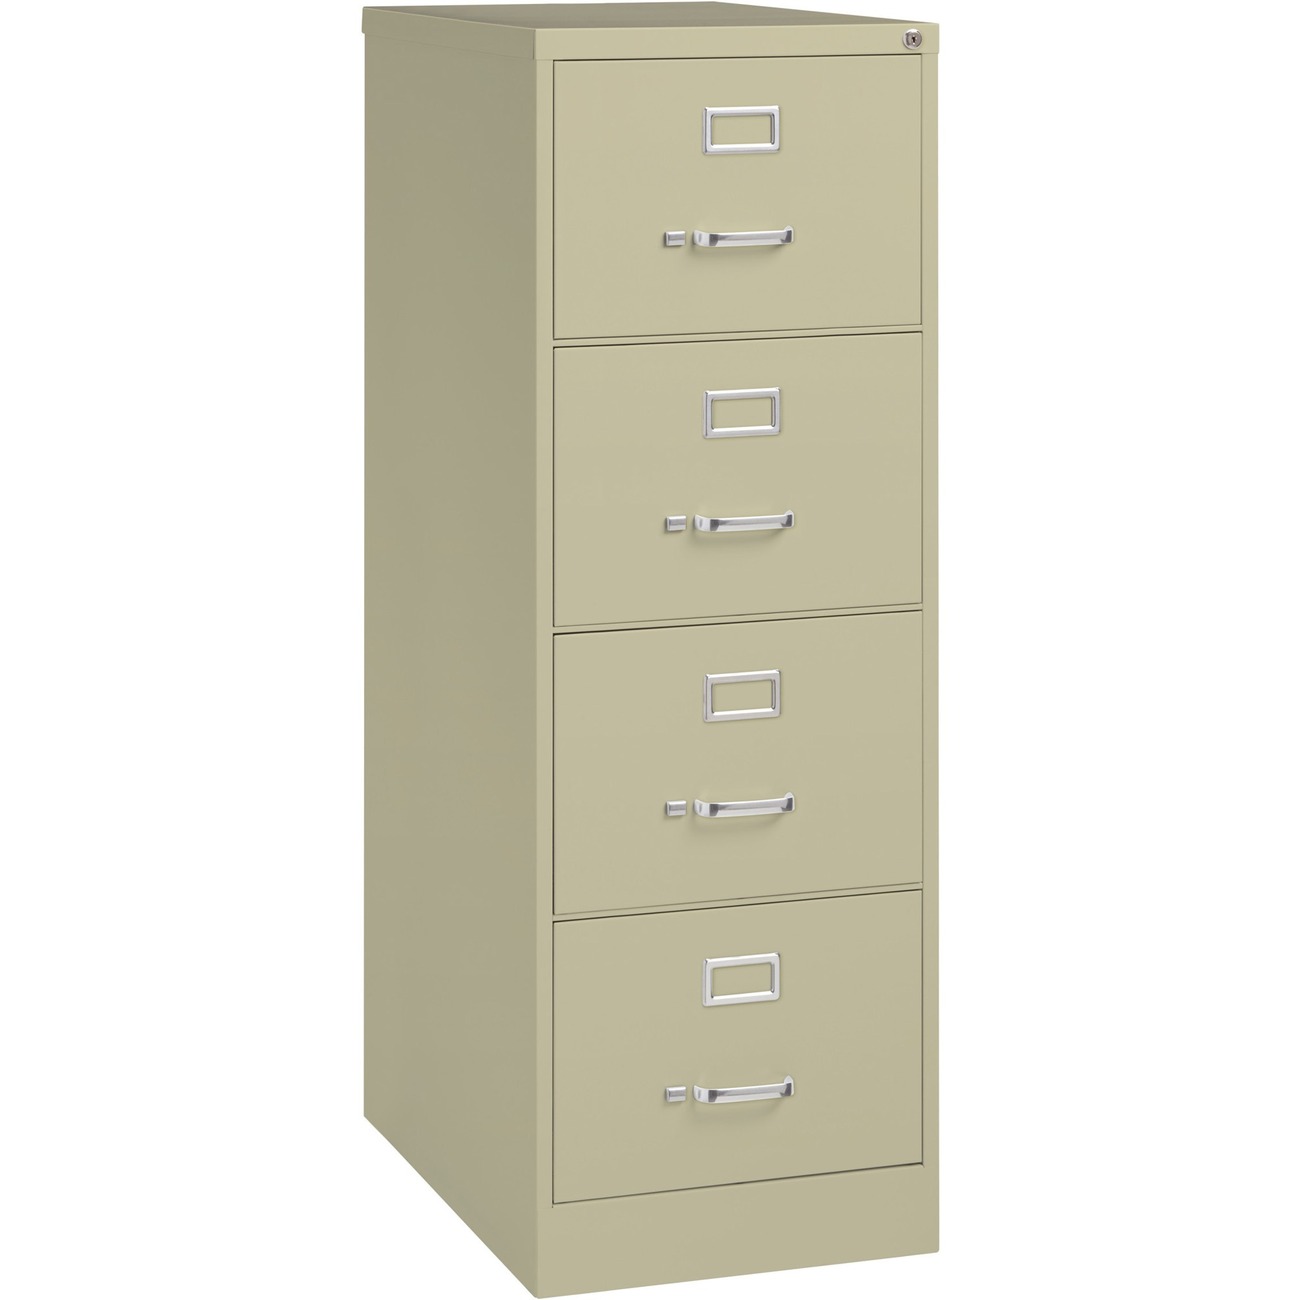 Putty Hon 4 Drawer Vertical Legal File Cabinet 18 x 26.5 x 52 by Hon